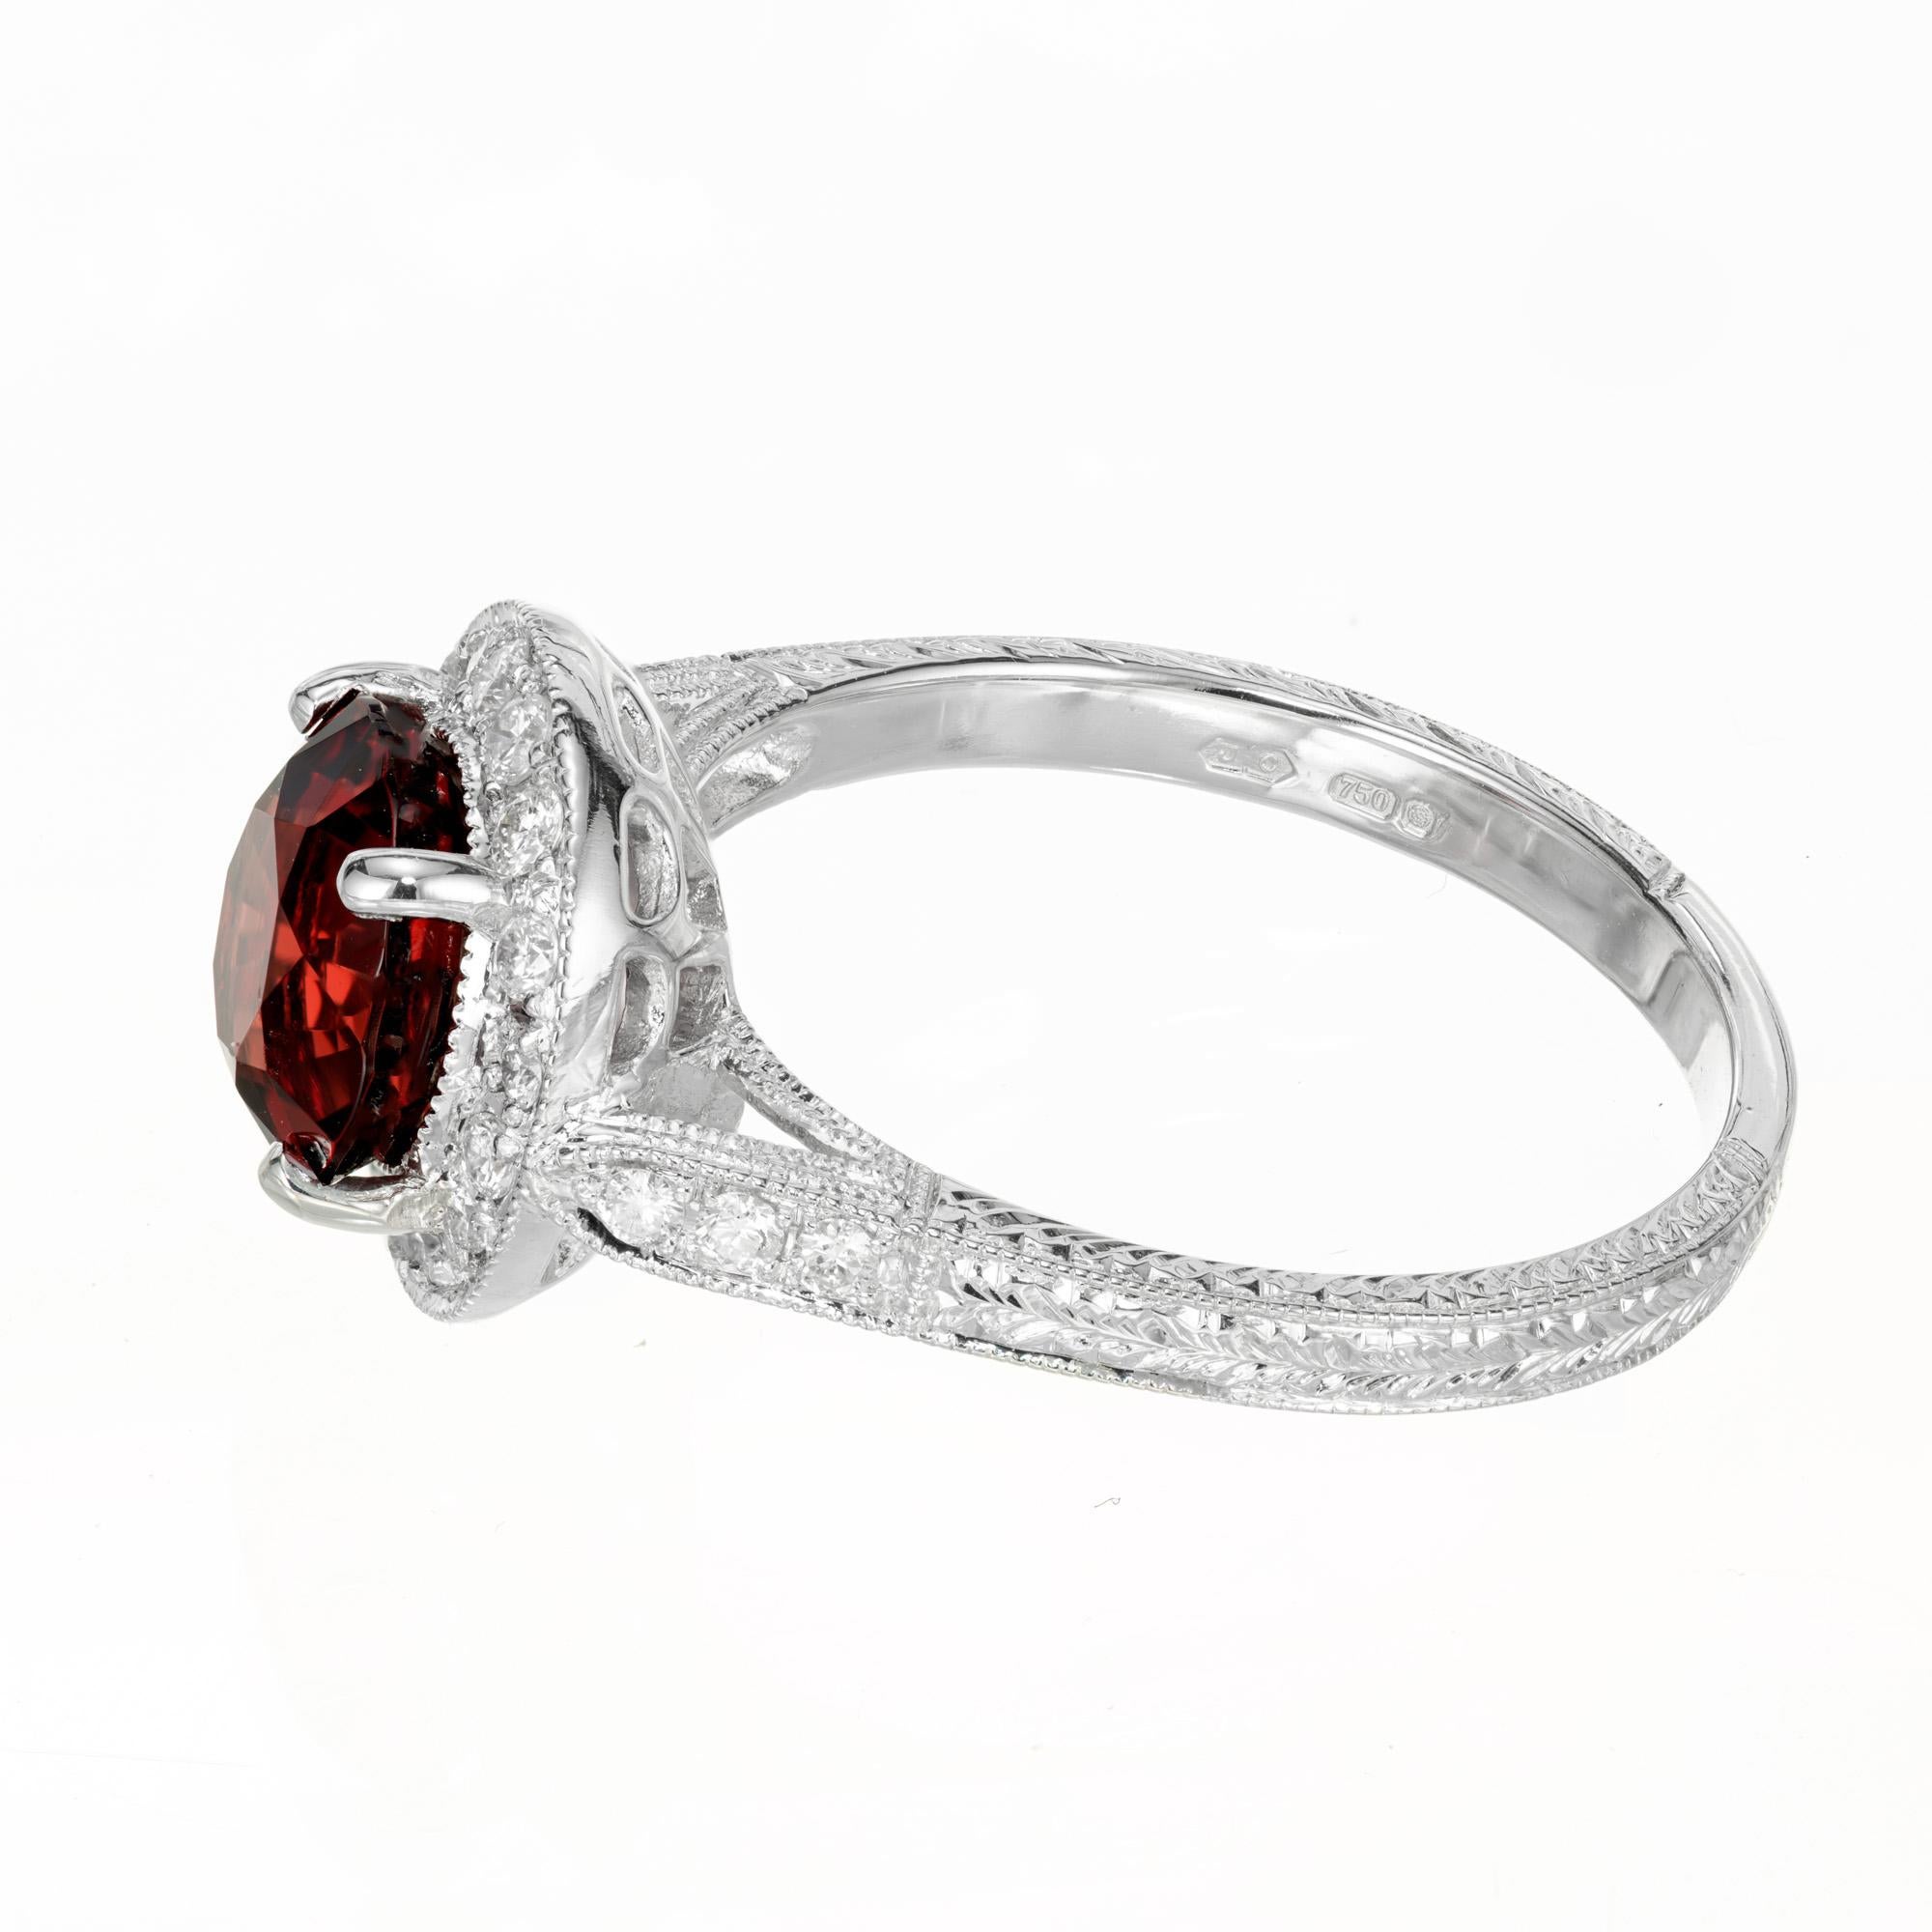 Women's Peter Suchy GIA Certified 2.42 Carat Red Spinel Diamond Halo White Gold Ring For Sale